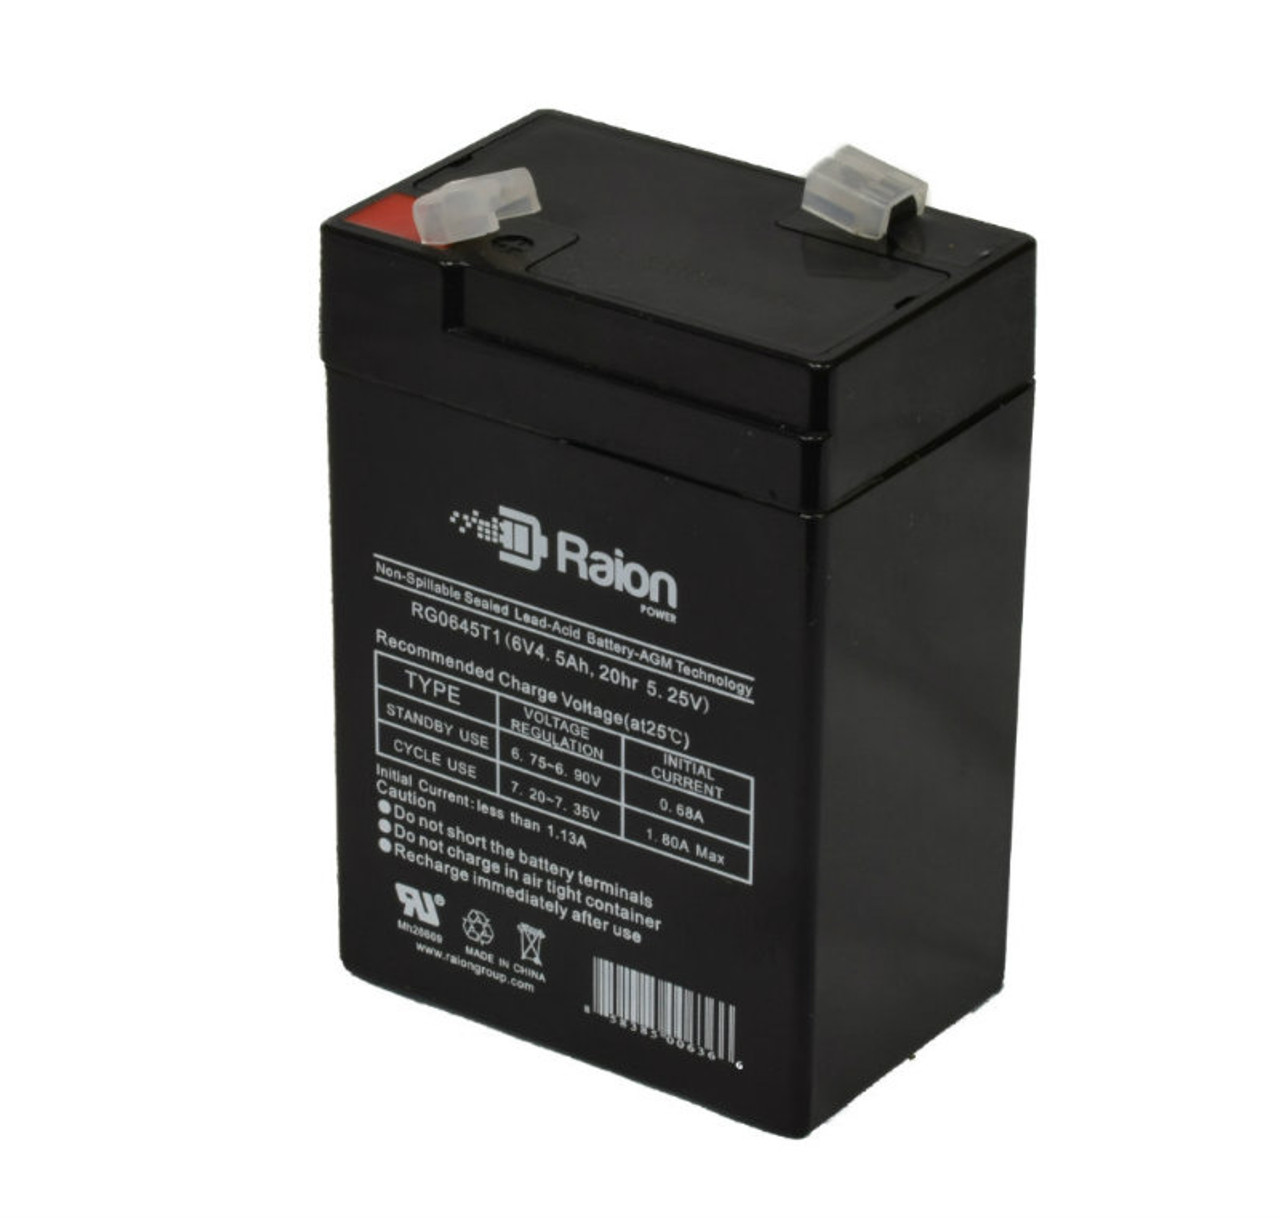 Raion Power RG0645T1 6V 4.5Ah Replacement Battery Cartridge for Leoch DJW6-4.5